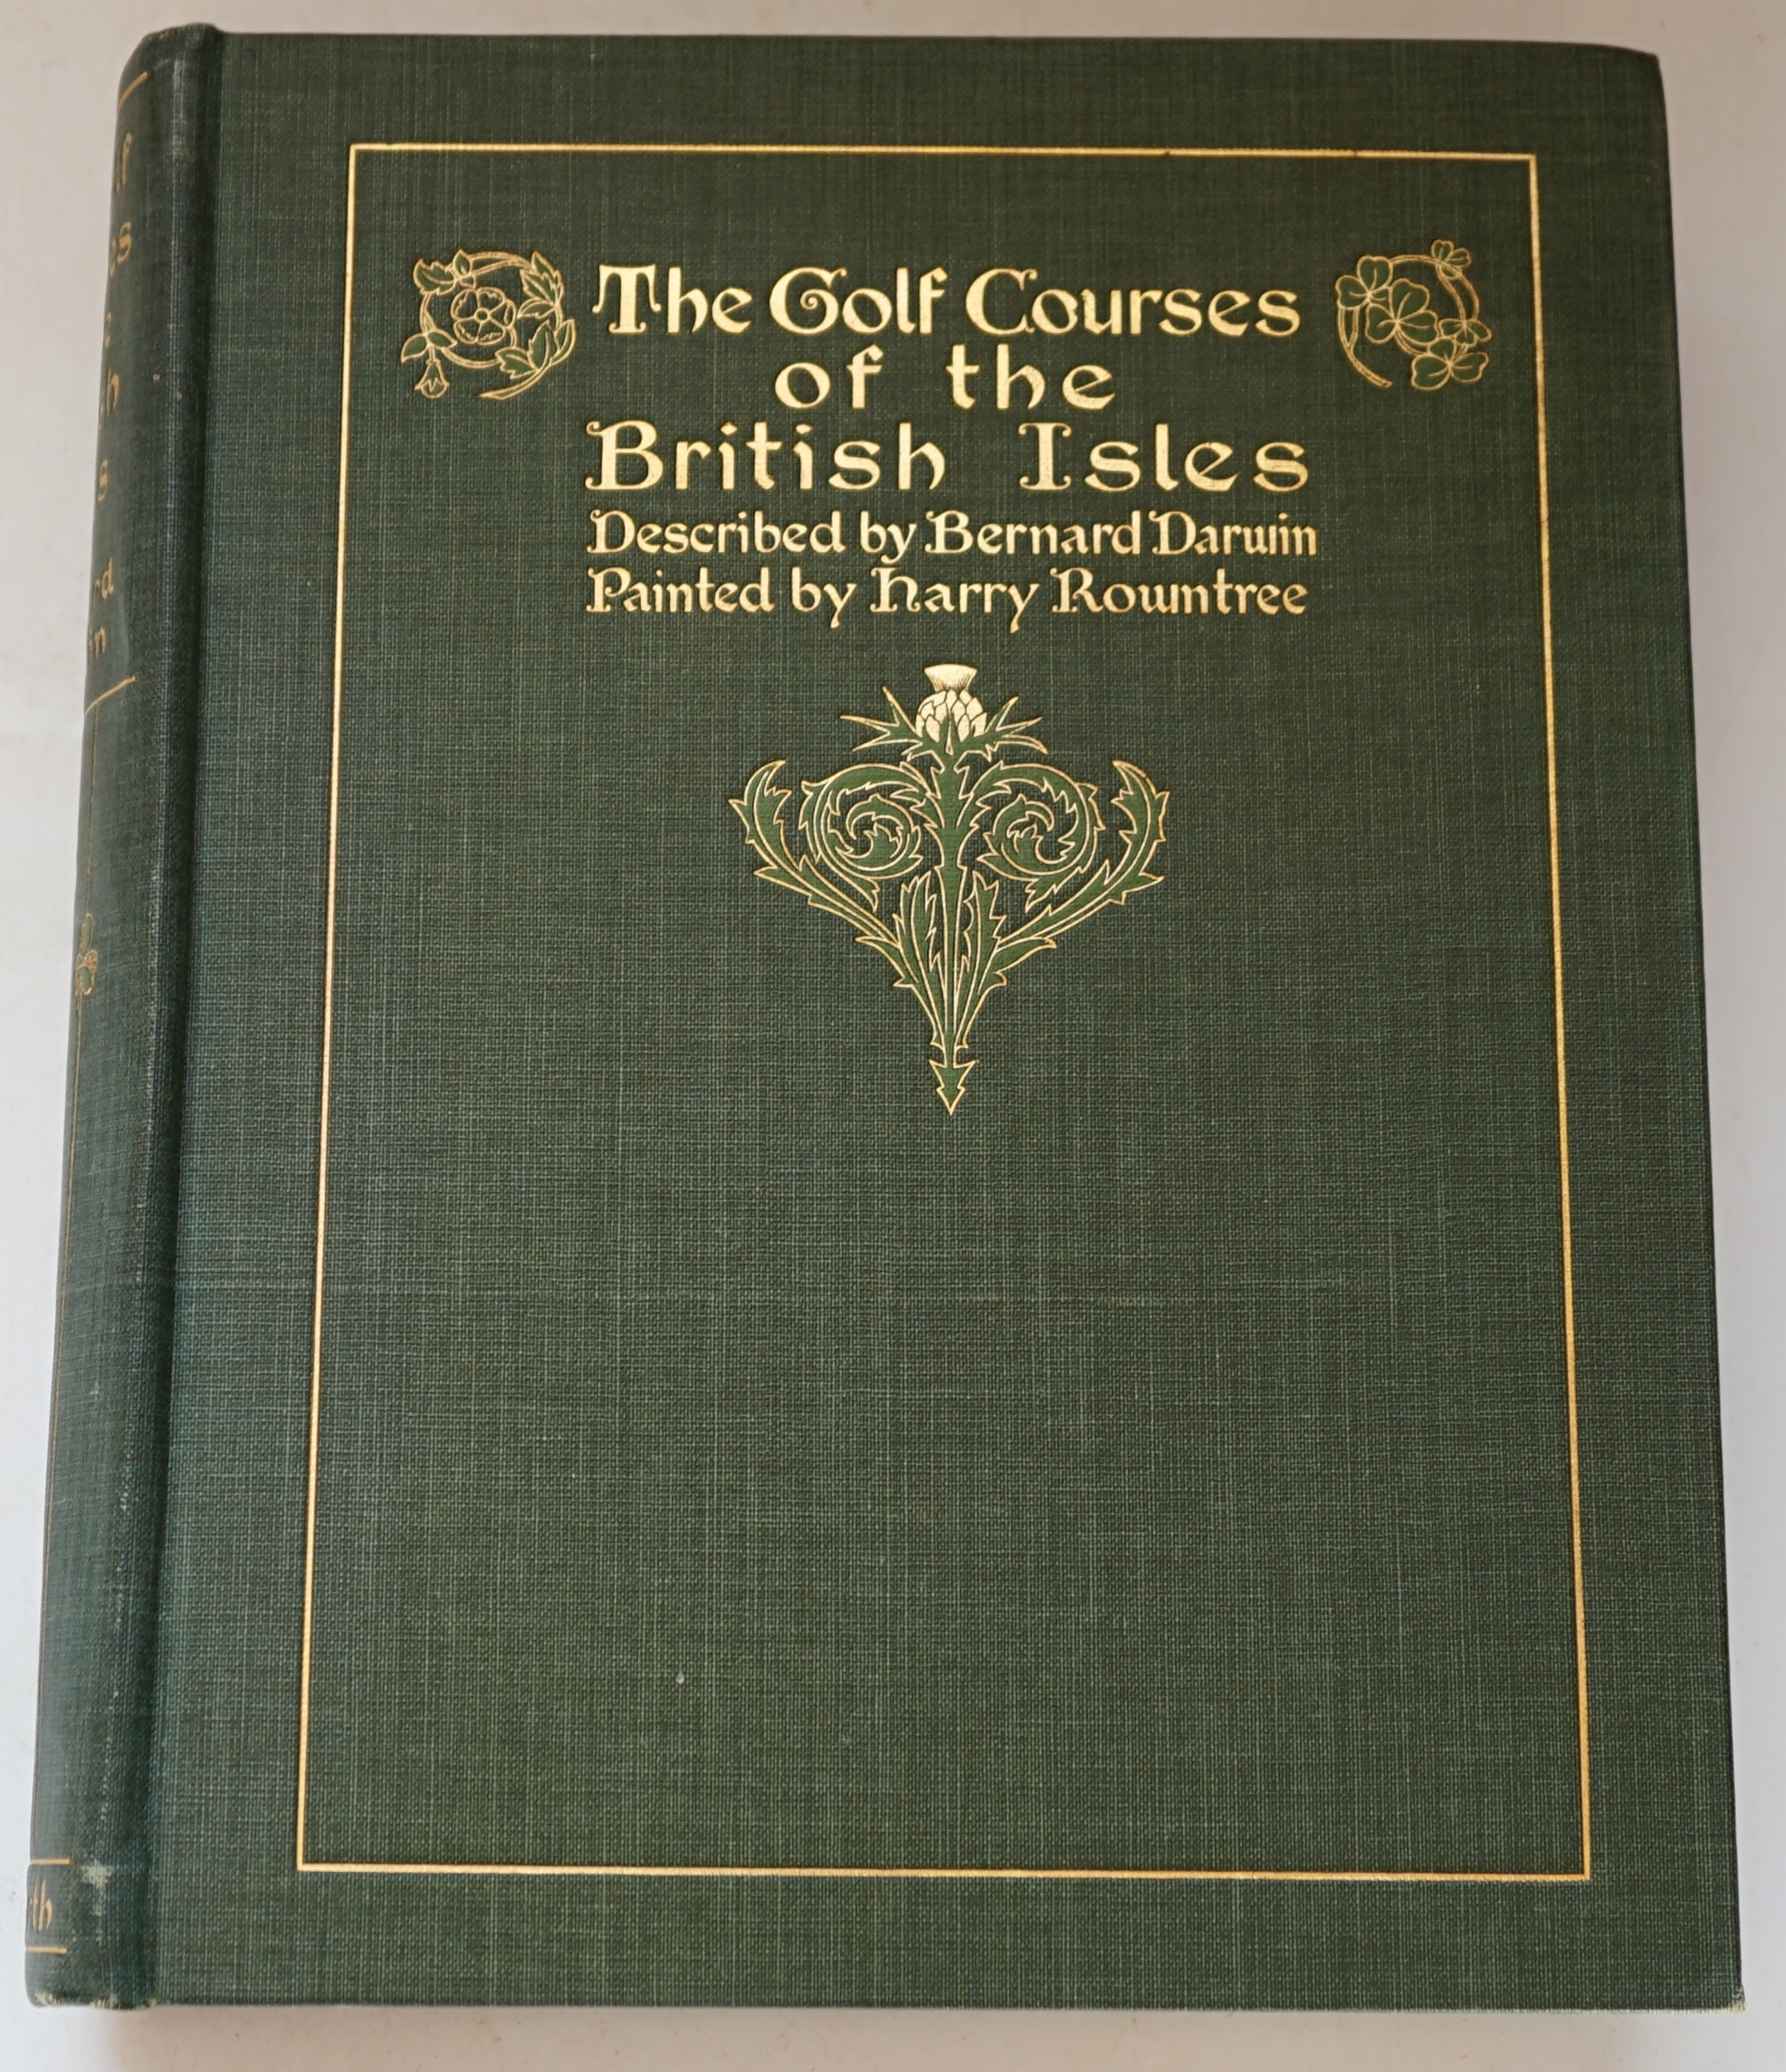 Darwin, Bernard - The Golf Courses of the British Isles, 1st edition, illustrated by Harry Rountree, with colour frontispiece and 44 colour plates, 4to, publisher's green pictorial cloth, some spotting, Duckworth, London